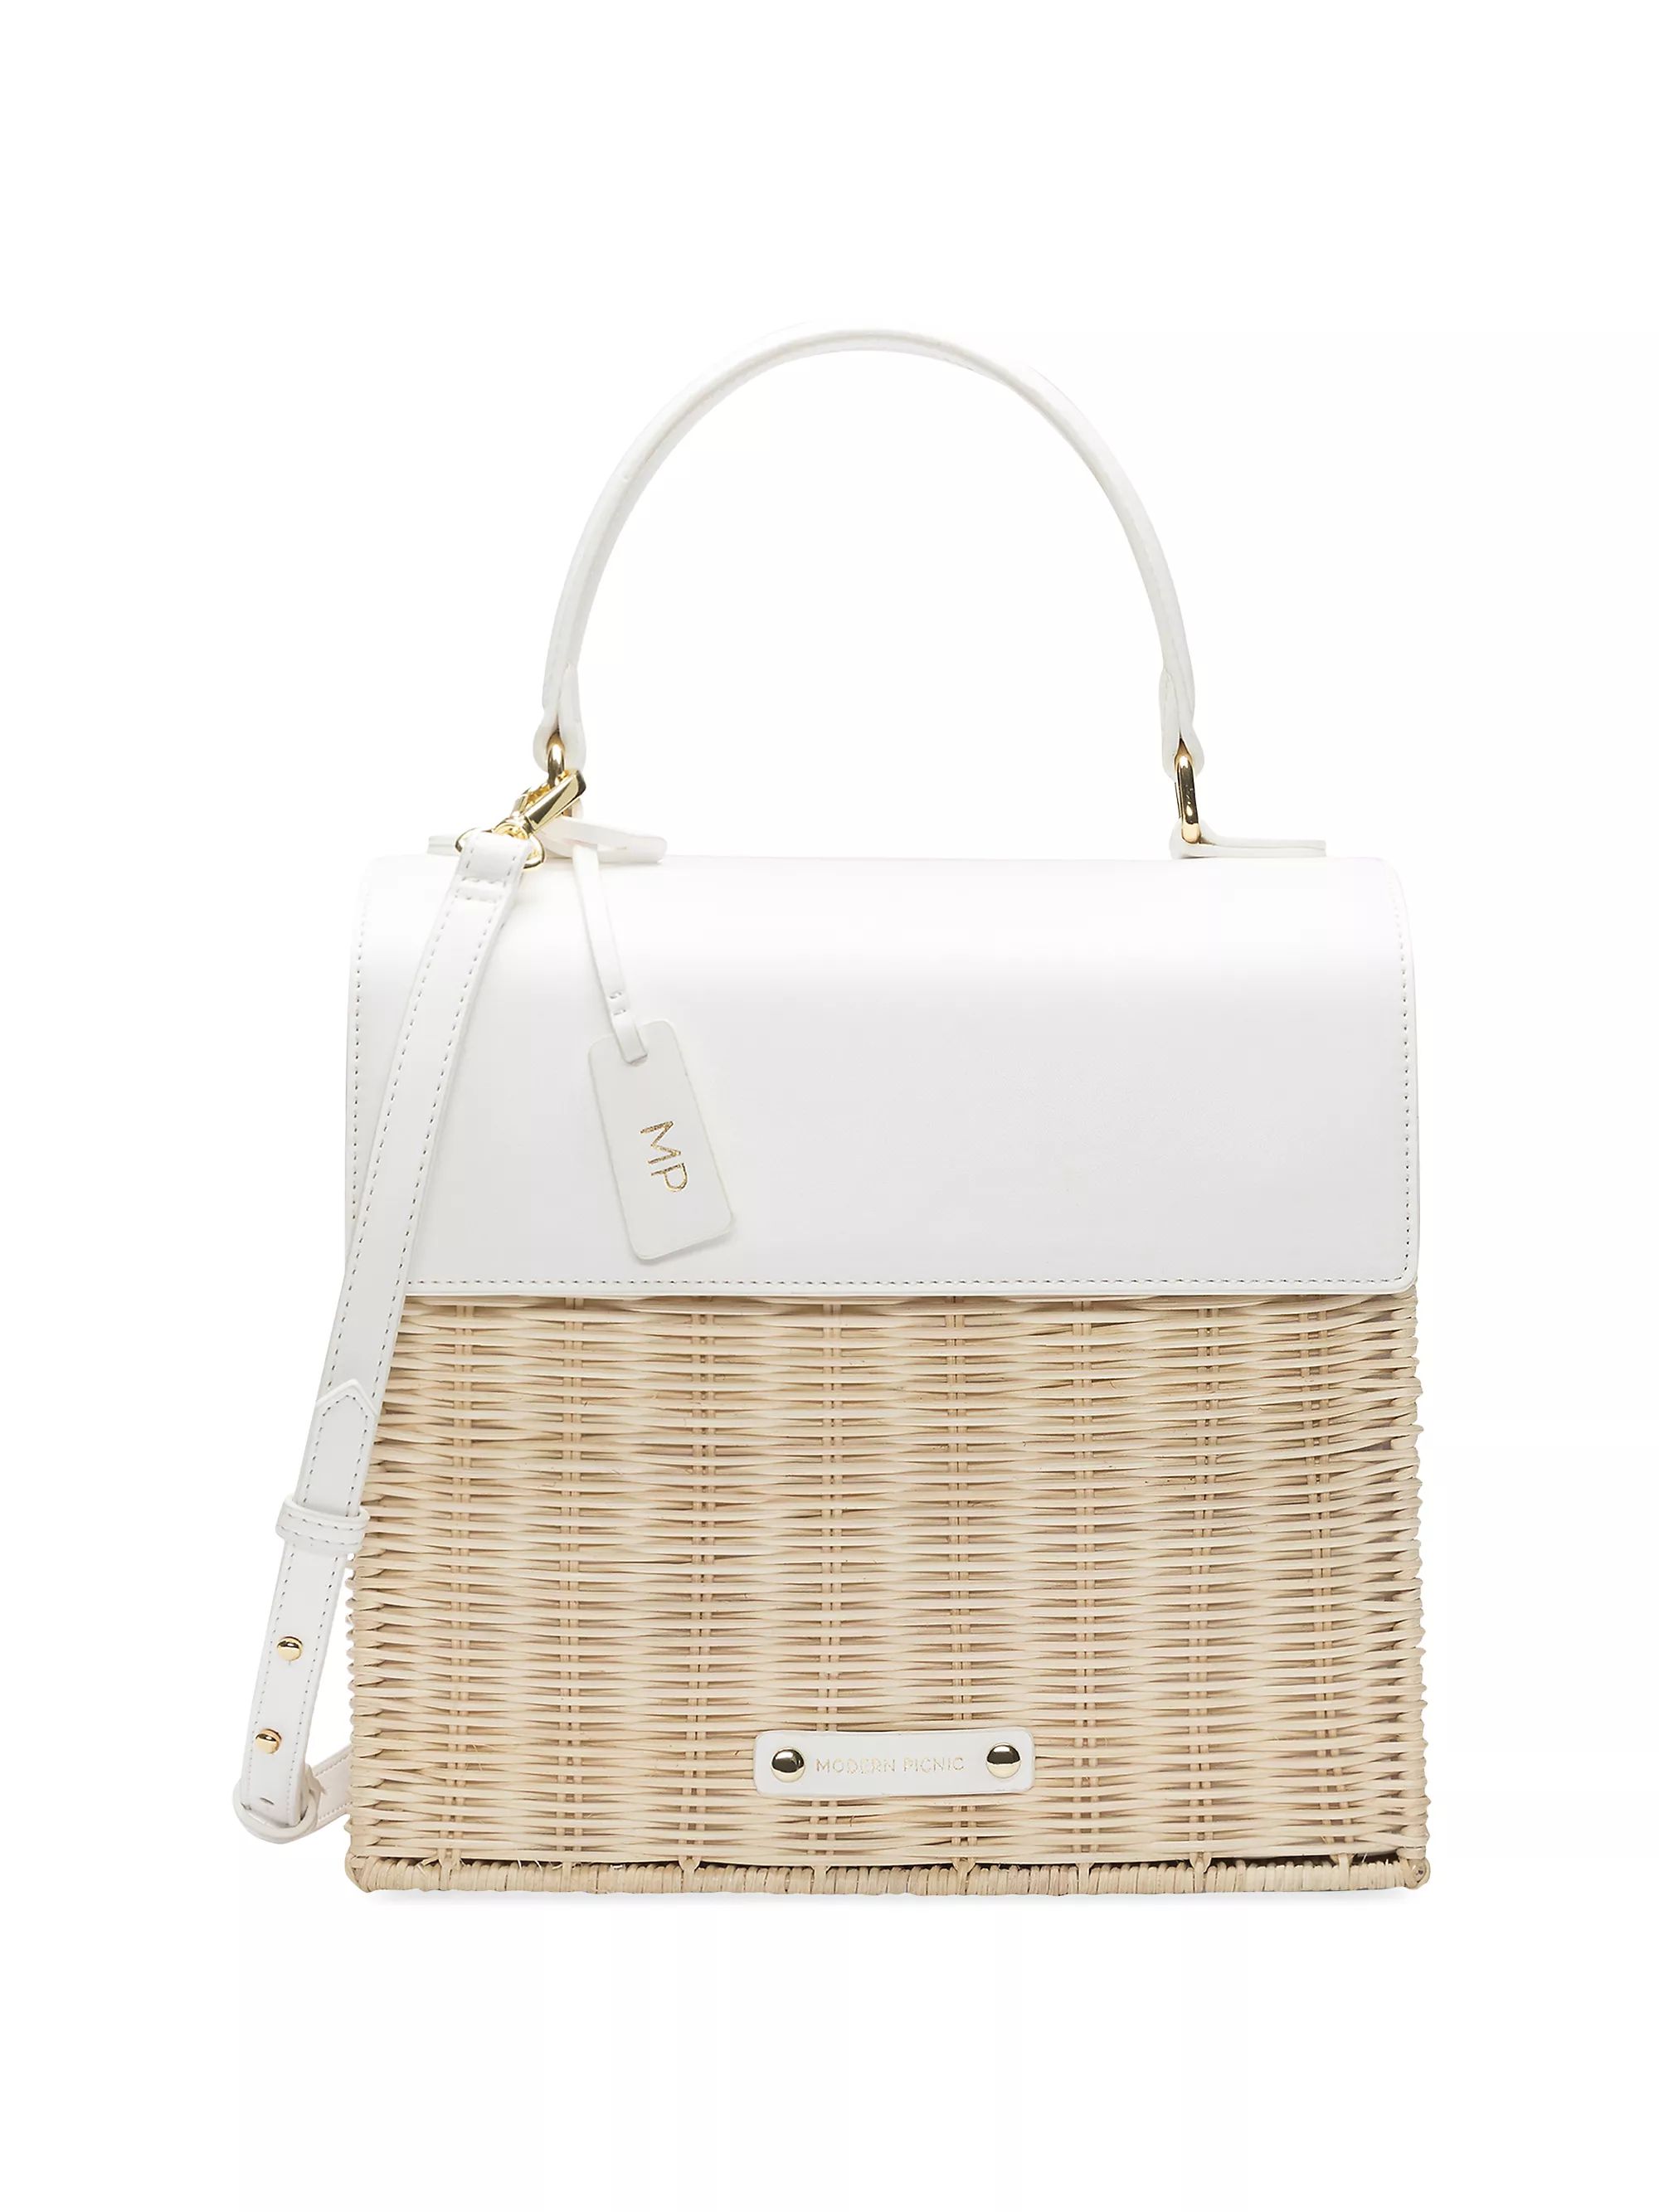 WickerAll Shoulder BagsModern PicnicThe Luncher Wicker & Vegan Leather Bag$169
            
     ... | Saks Fifth Avenue